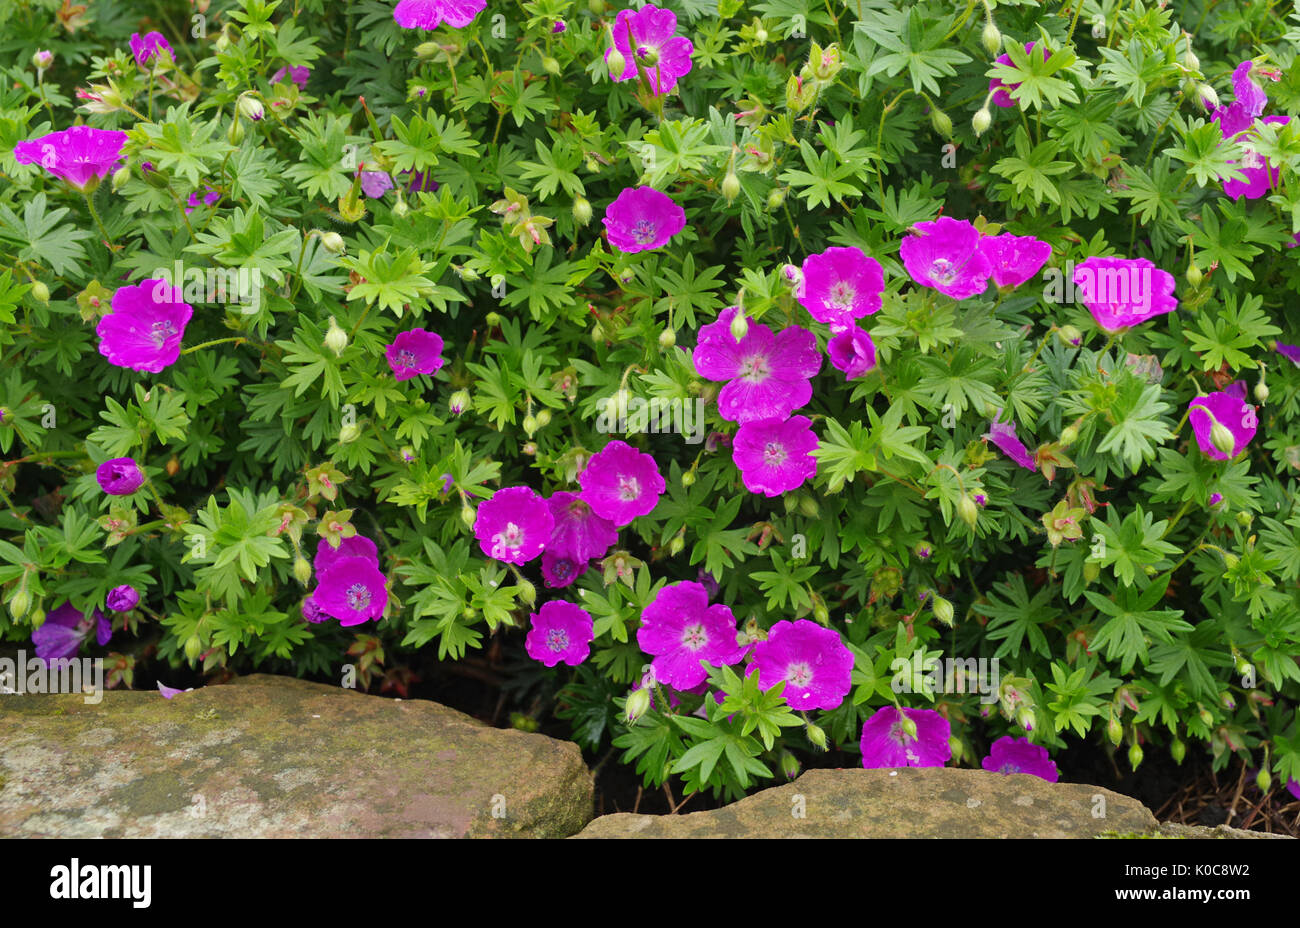 Deep pink small flowered perennial geranium plant growing in English garden next to weathered sandstone edging. Stock Photo